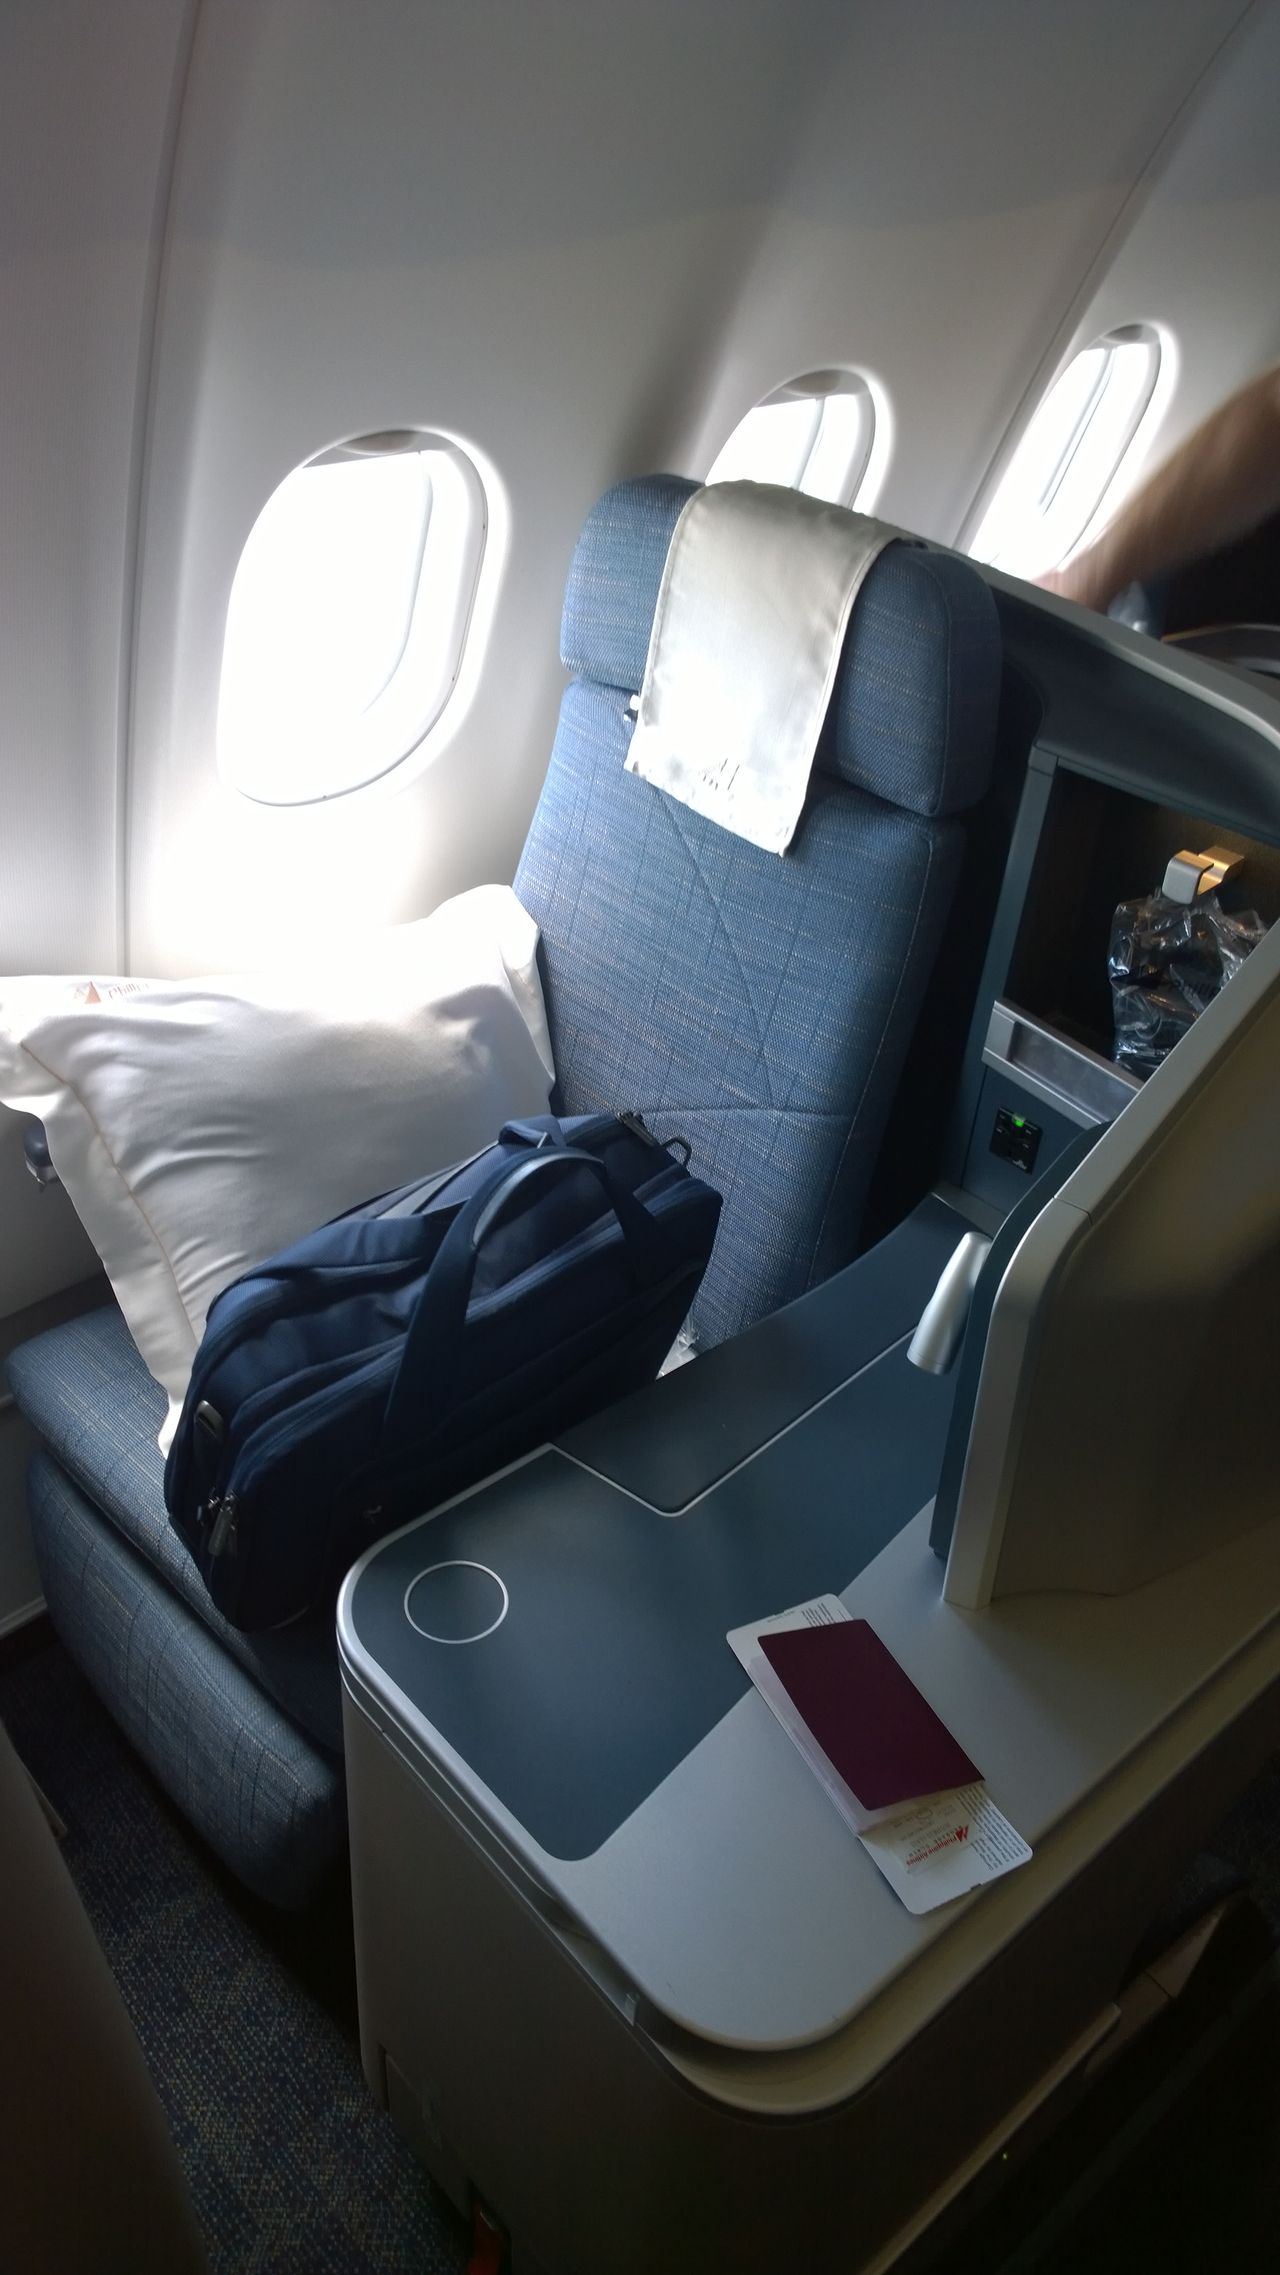 Review of Philippine Airlines flight from Sydney to Manila in Business